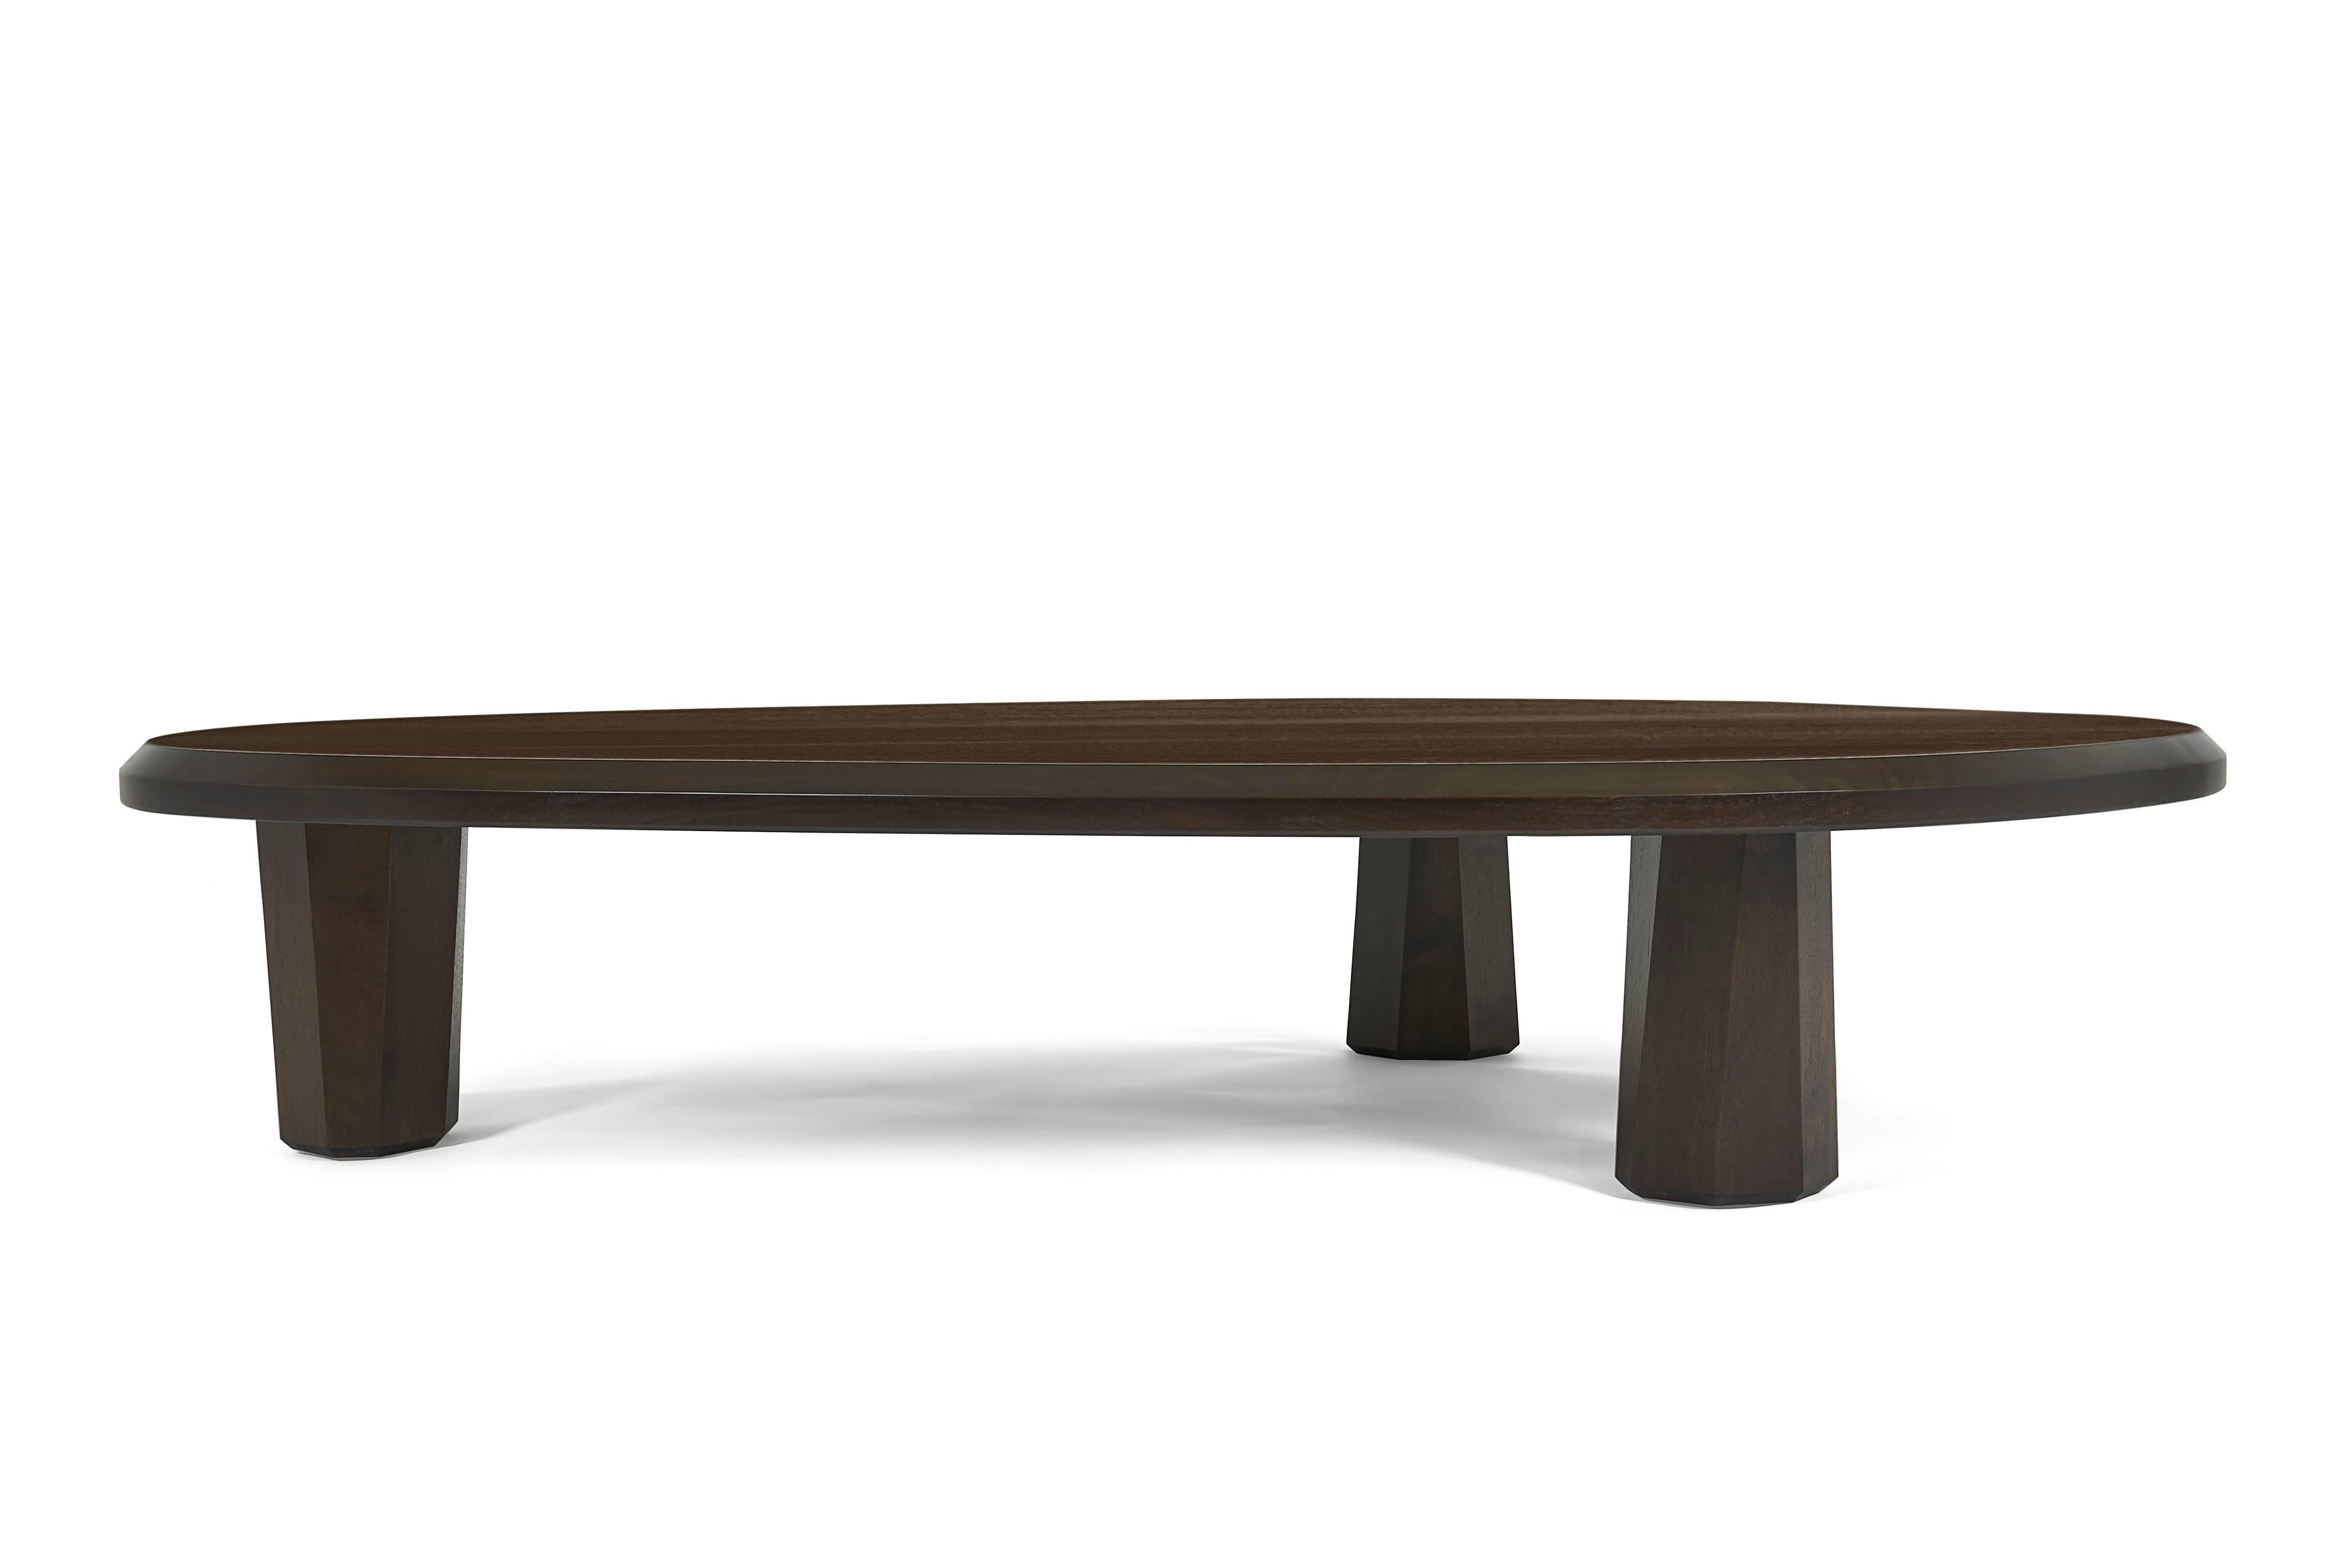 Sturdy and sophisticated, the alto coffee table features asymmetrical lines and a rich finish on walnut.